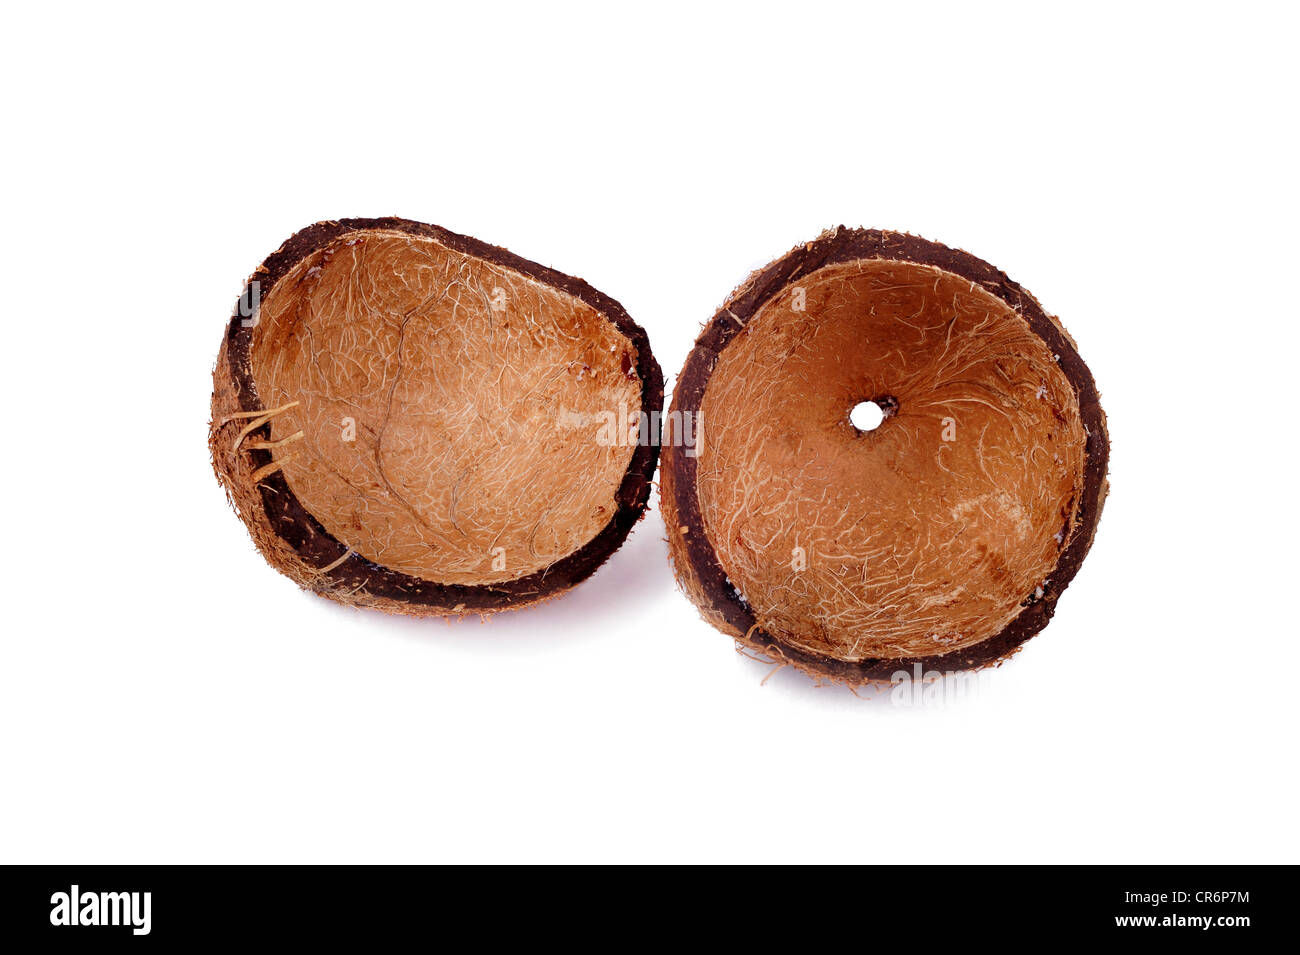 The shell of a coconut isolated on white background Stock Photo